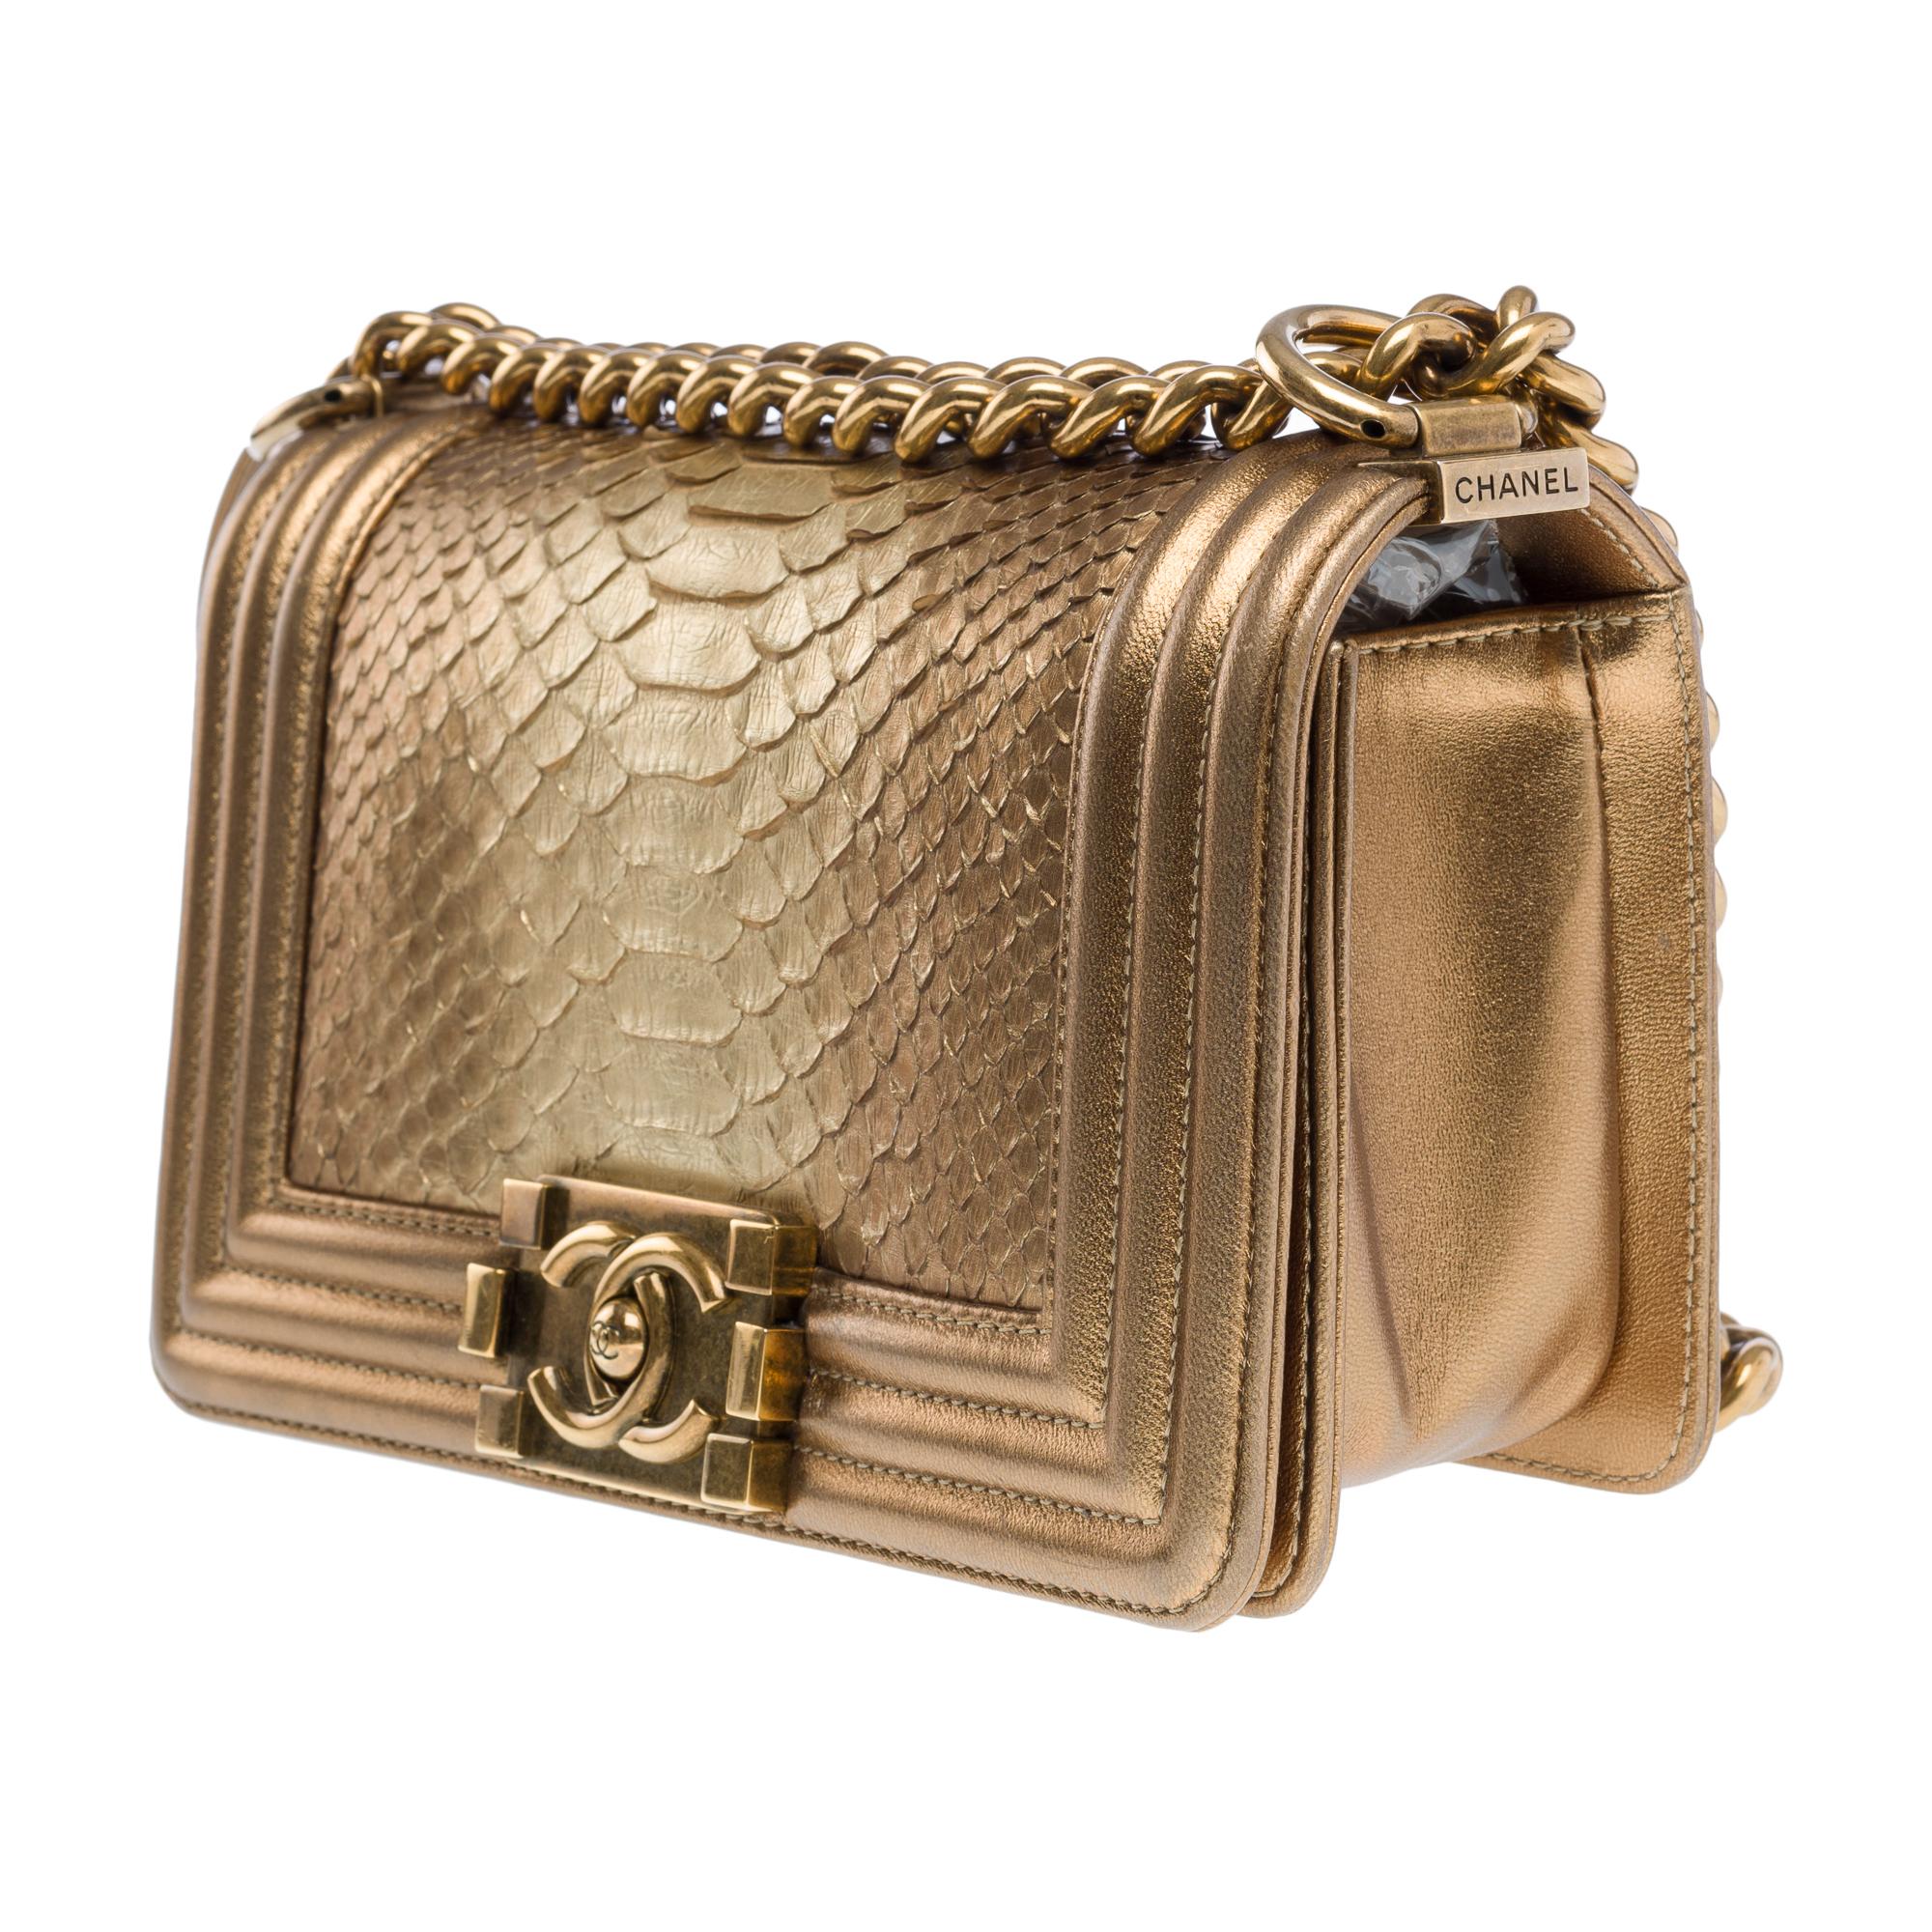 Amazing & Rare Chanel Boy small shoulder bag in Golden Python leather, GHW 1